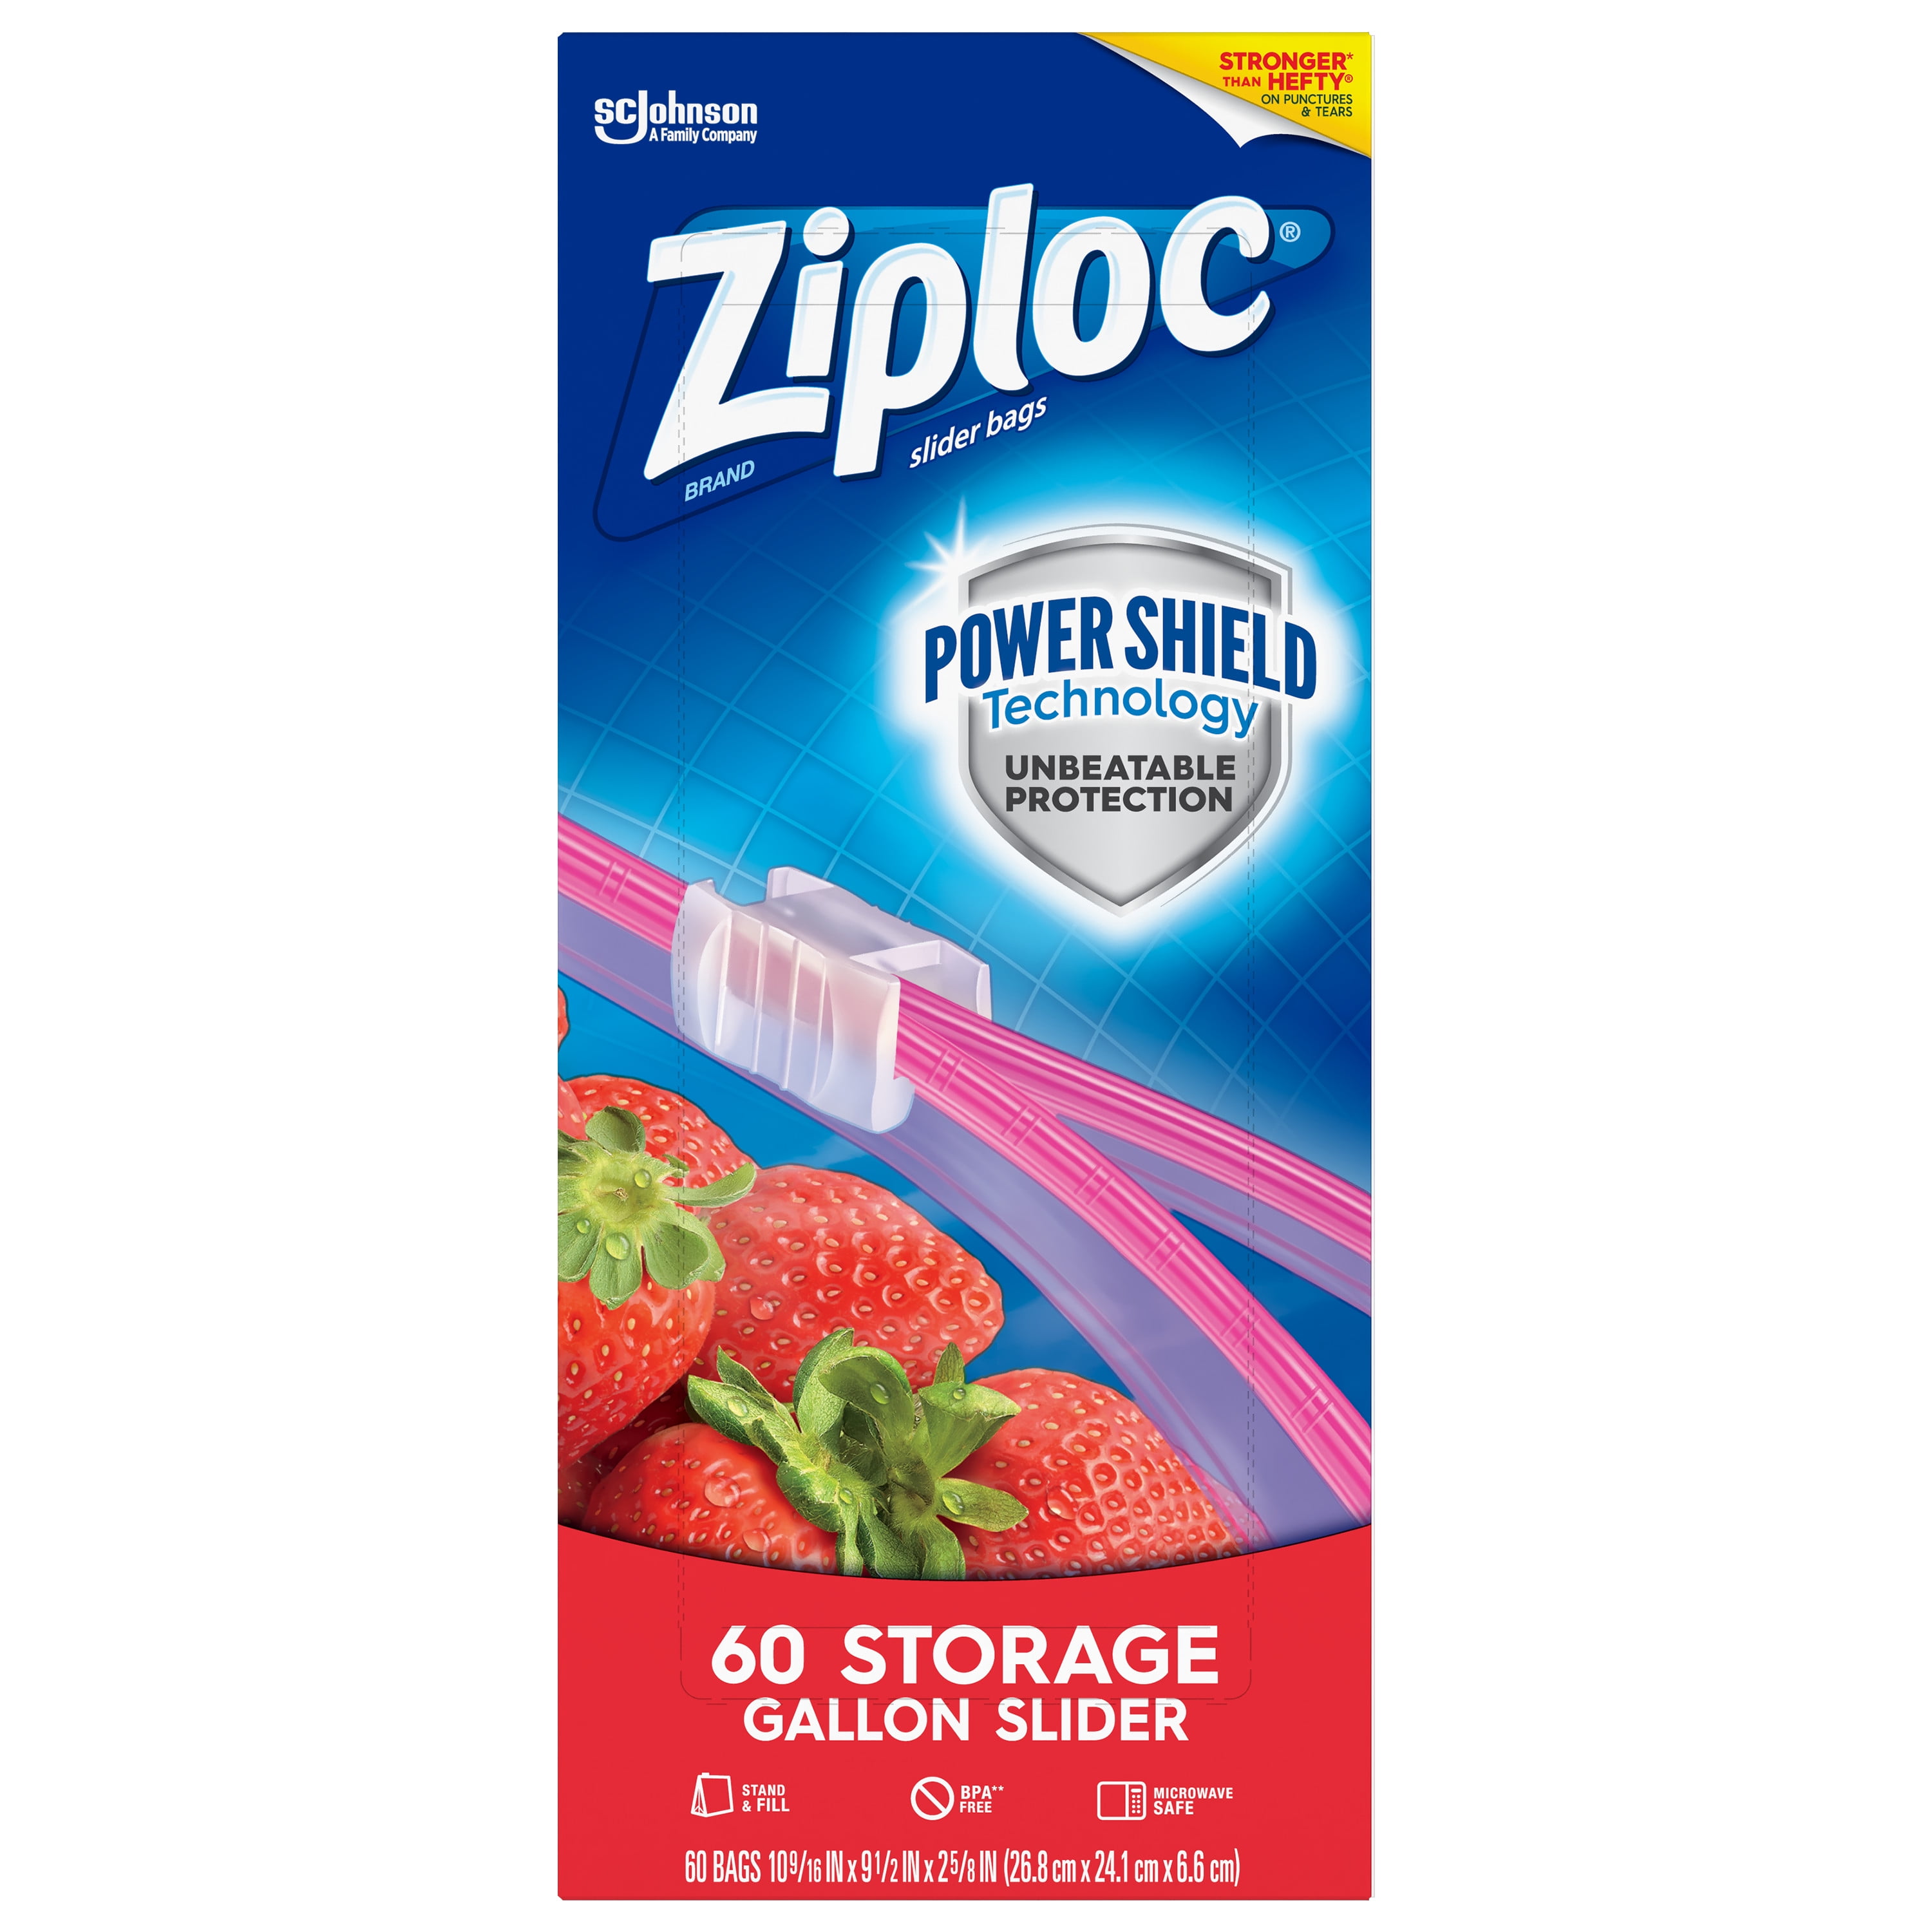 Ziploc® Brand Slider Storage Bags with Power Shield Technology, Gallon, 60  Count